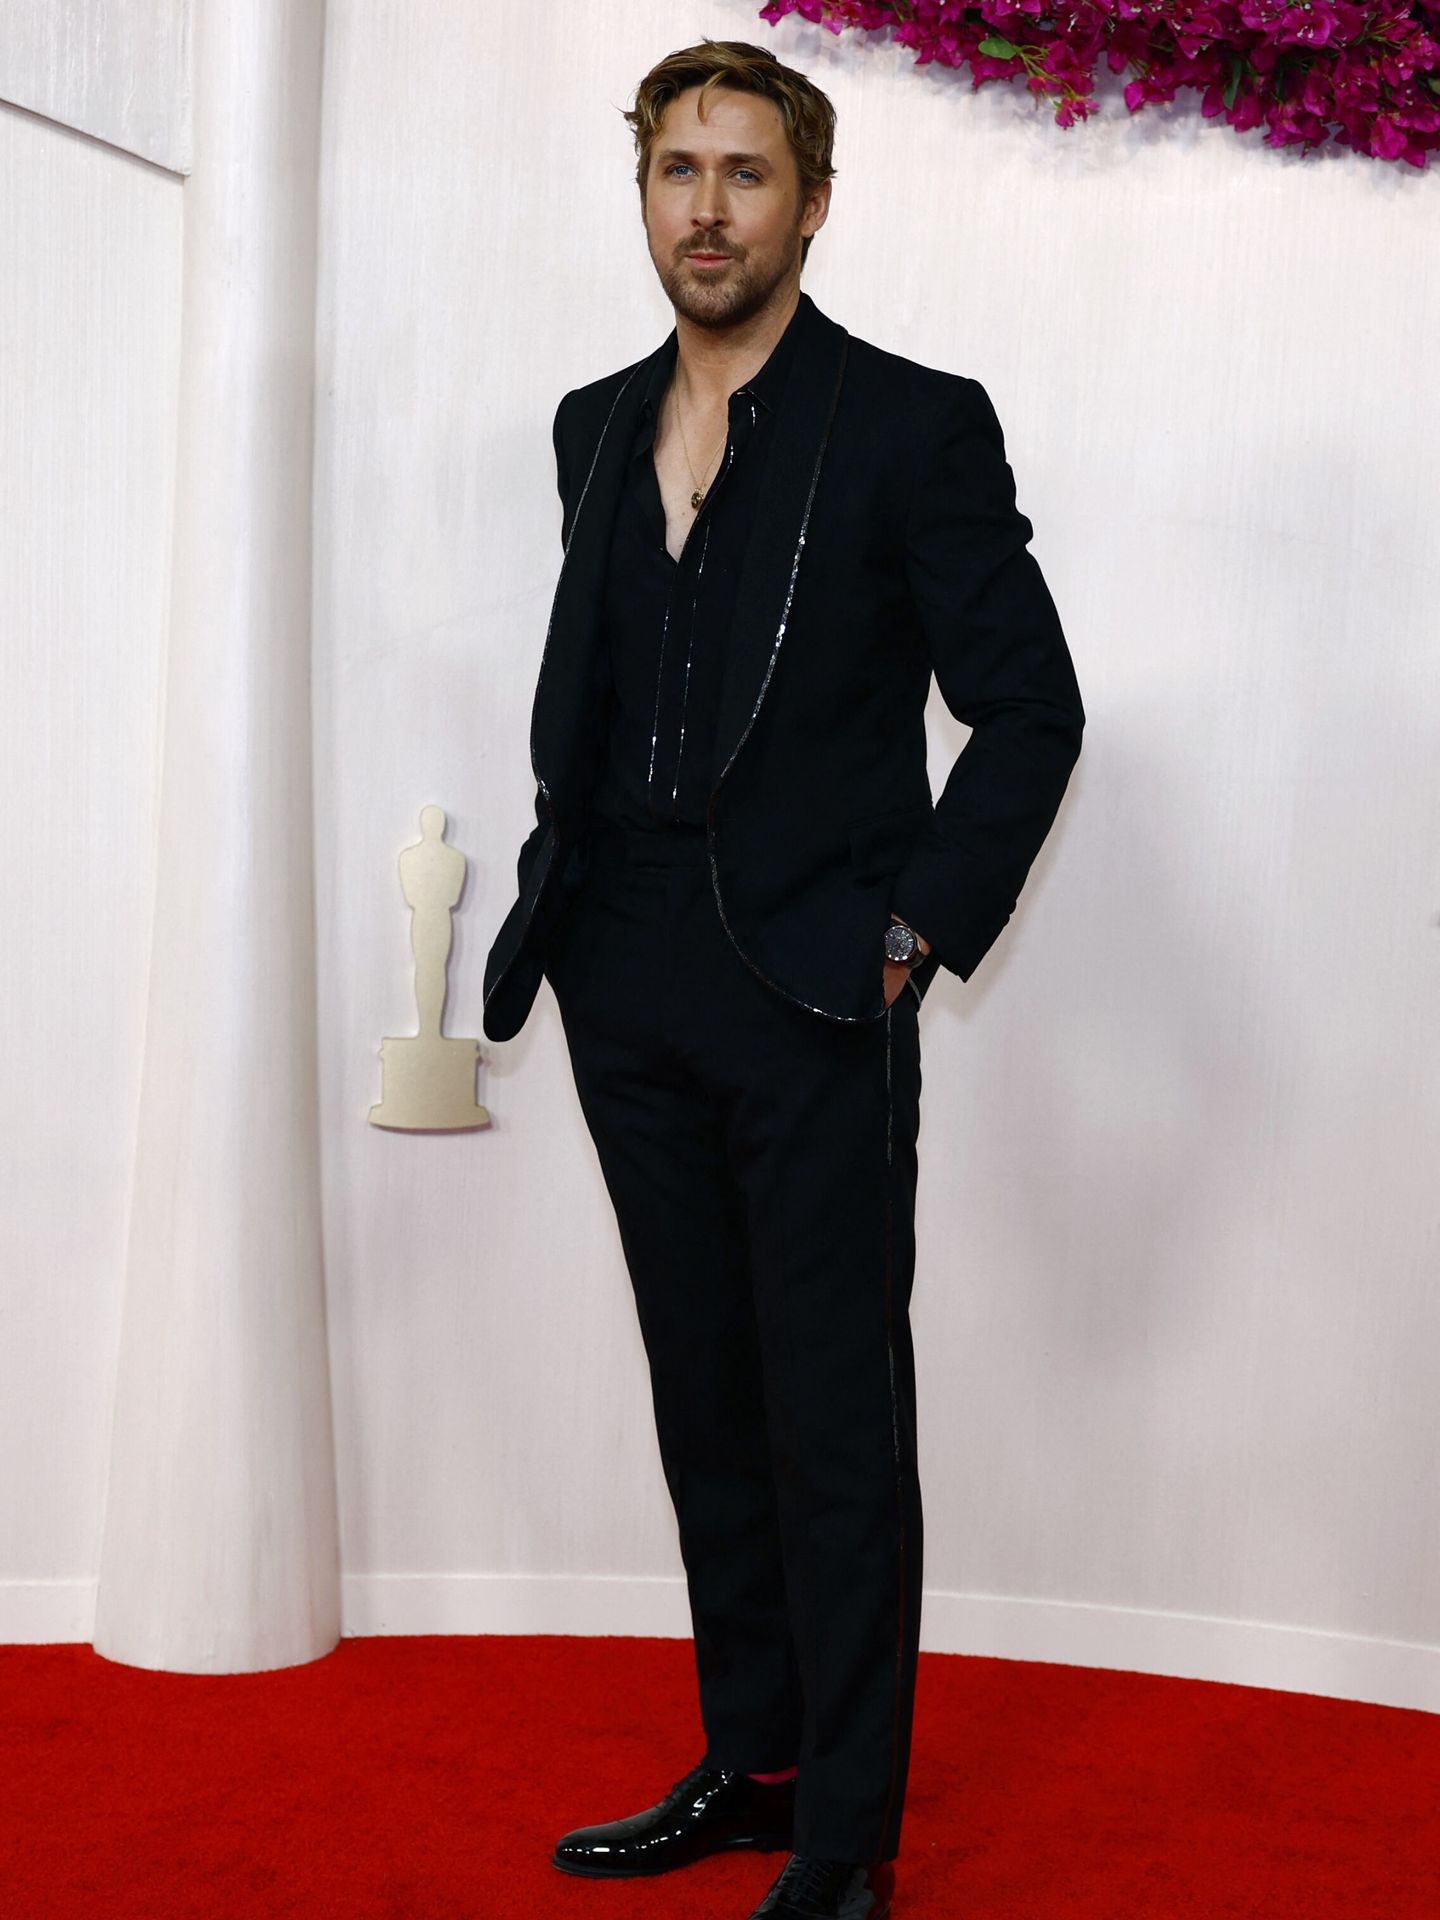 Ryan Gosling poses on the red carpet during the Oscars arrivals at the 96th Academy Awards in Hollywood, Los Angeles, California, U.S., March 10, 2024. REUTERS Sarah Meyssonnier